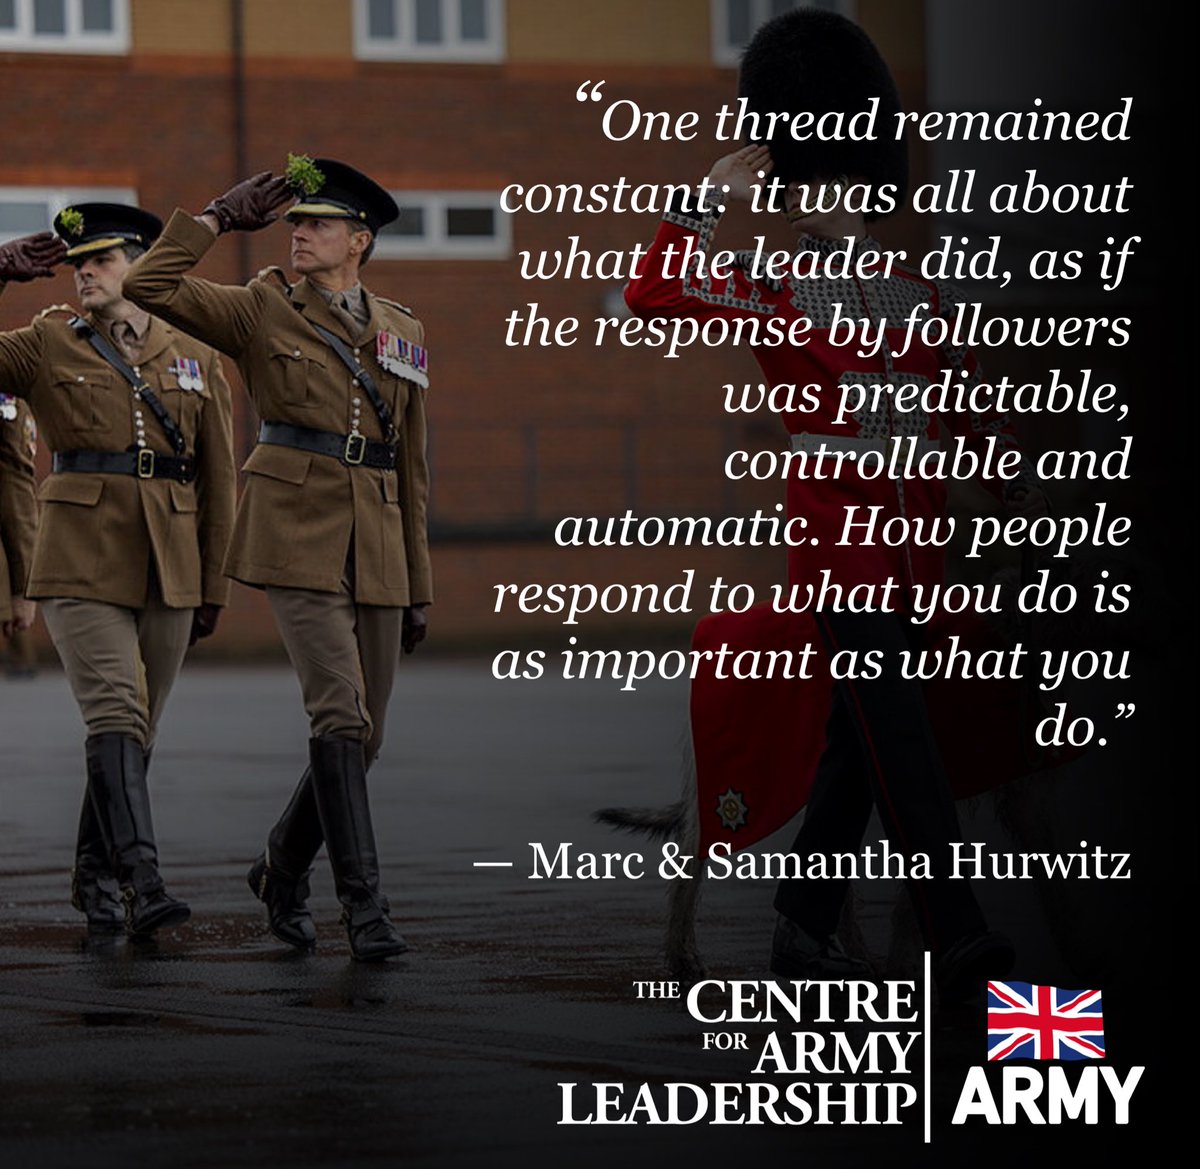 'One thread remained constant: it was all about what the leader did, as if the response by followers was predictable, controllable and automatic. How people respond to what you do is as important as what you do.' - Marc & Samantha Hurwitz #leader #follower #followership…